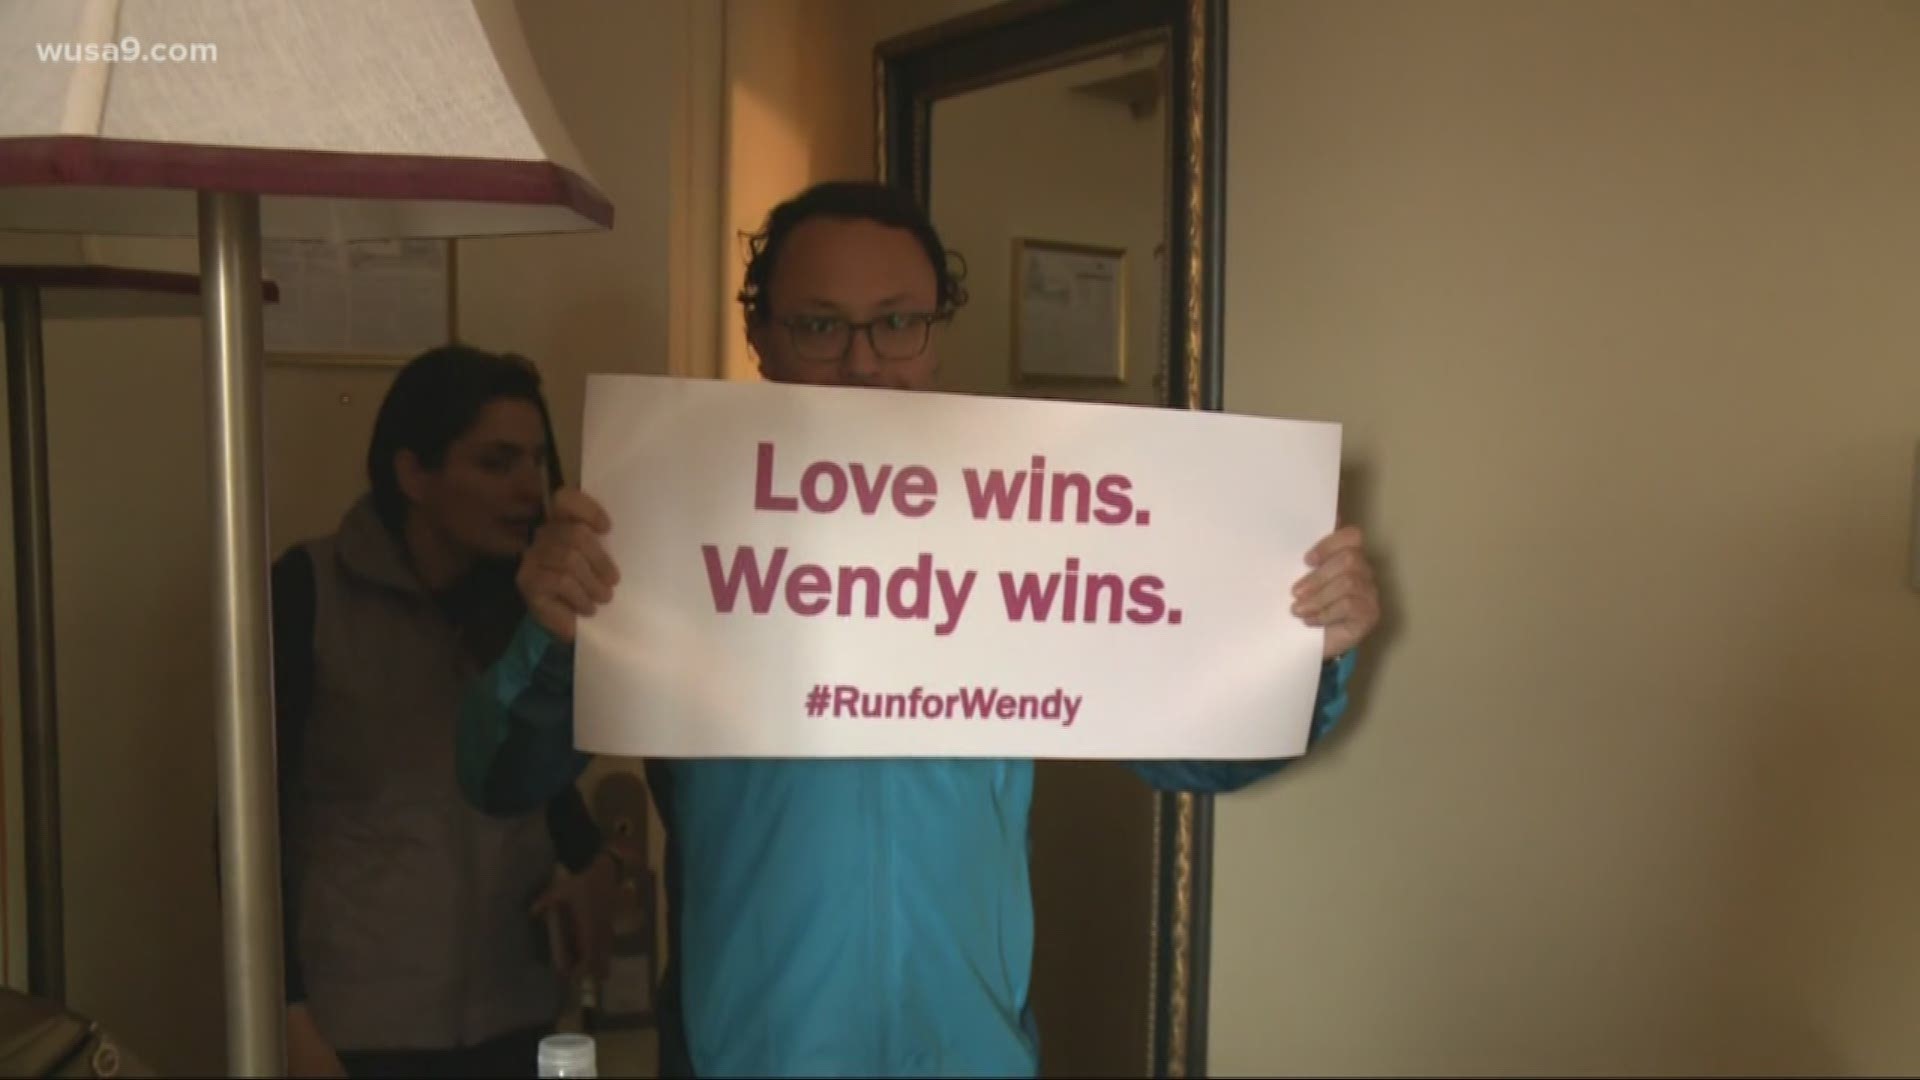 30,000 athletes are running the streets of Beantown this afternoon in the Boston Marathon. One of those runners is the fiance of Wendy Martinez. She was killed last year, while out on a run, training for the Boston Marathon.